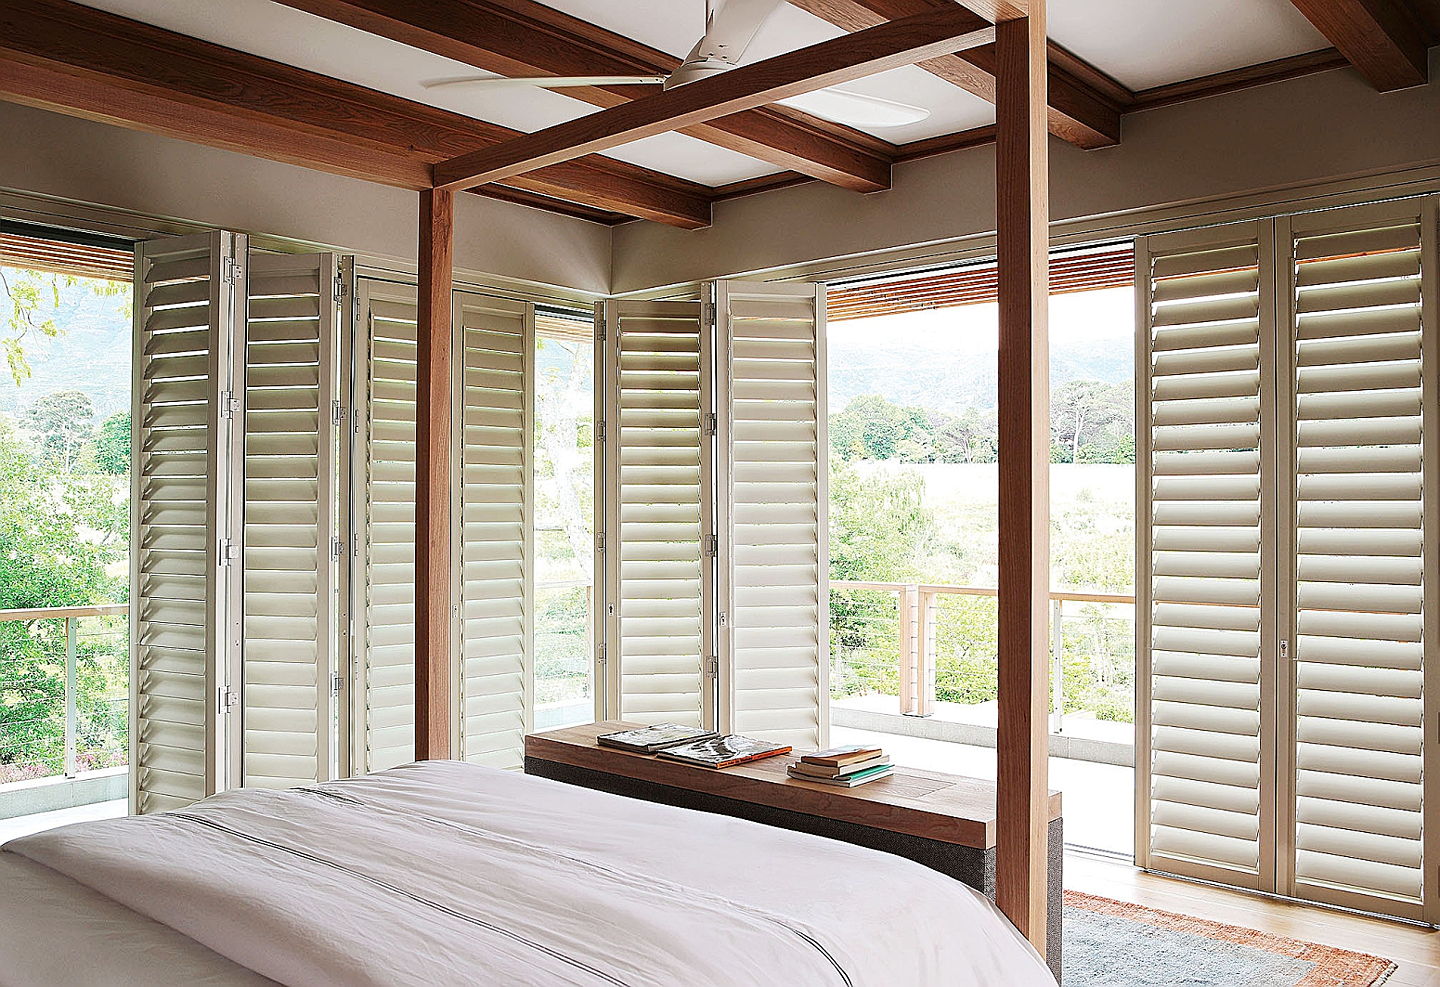  Hoedspruit
- – Price: POA
– Available from Plantation Shutters